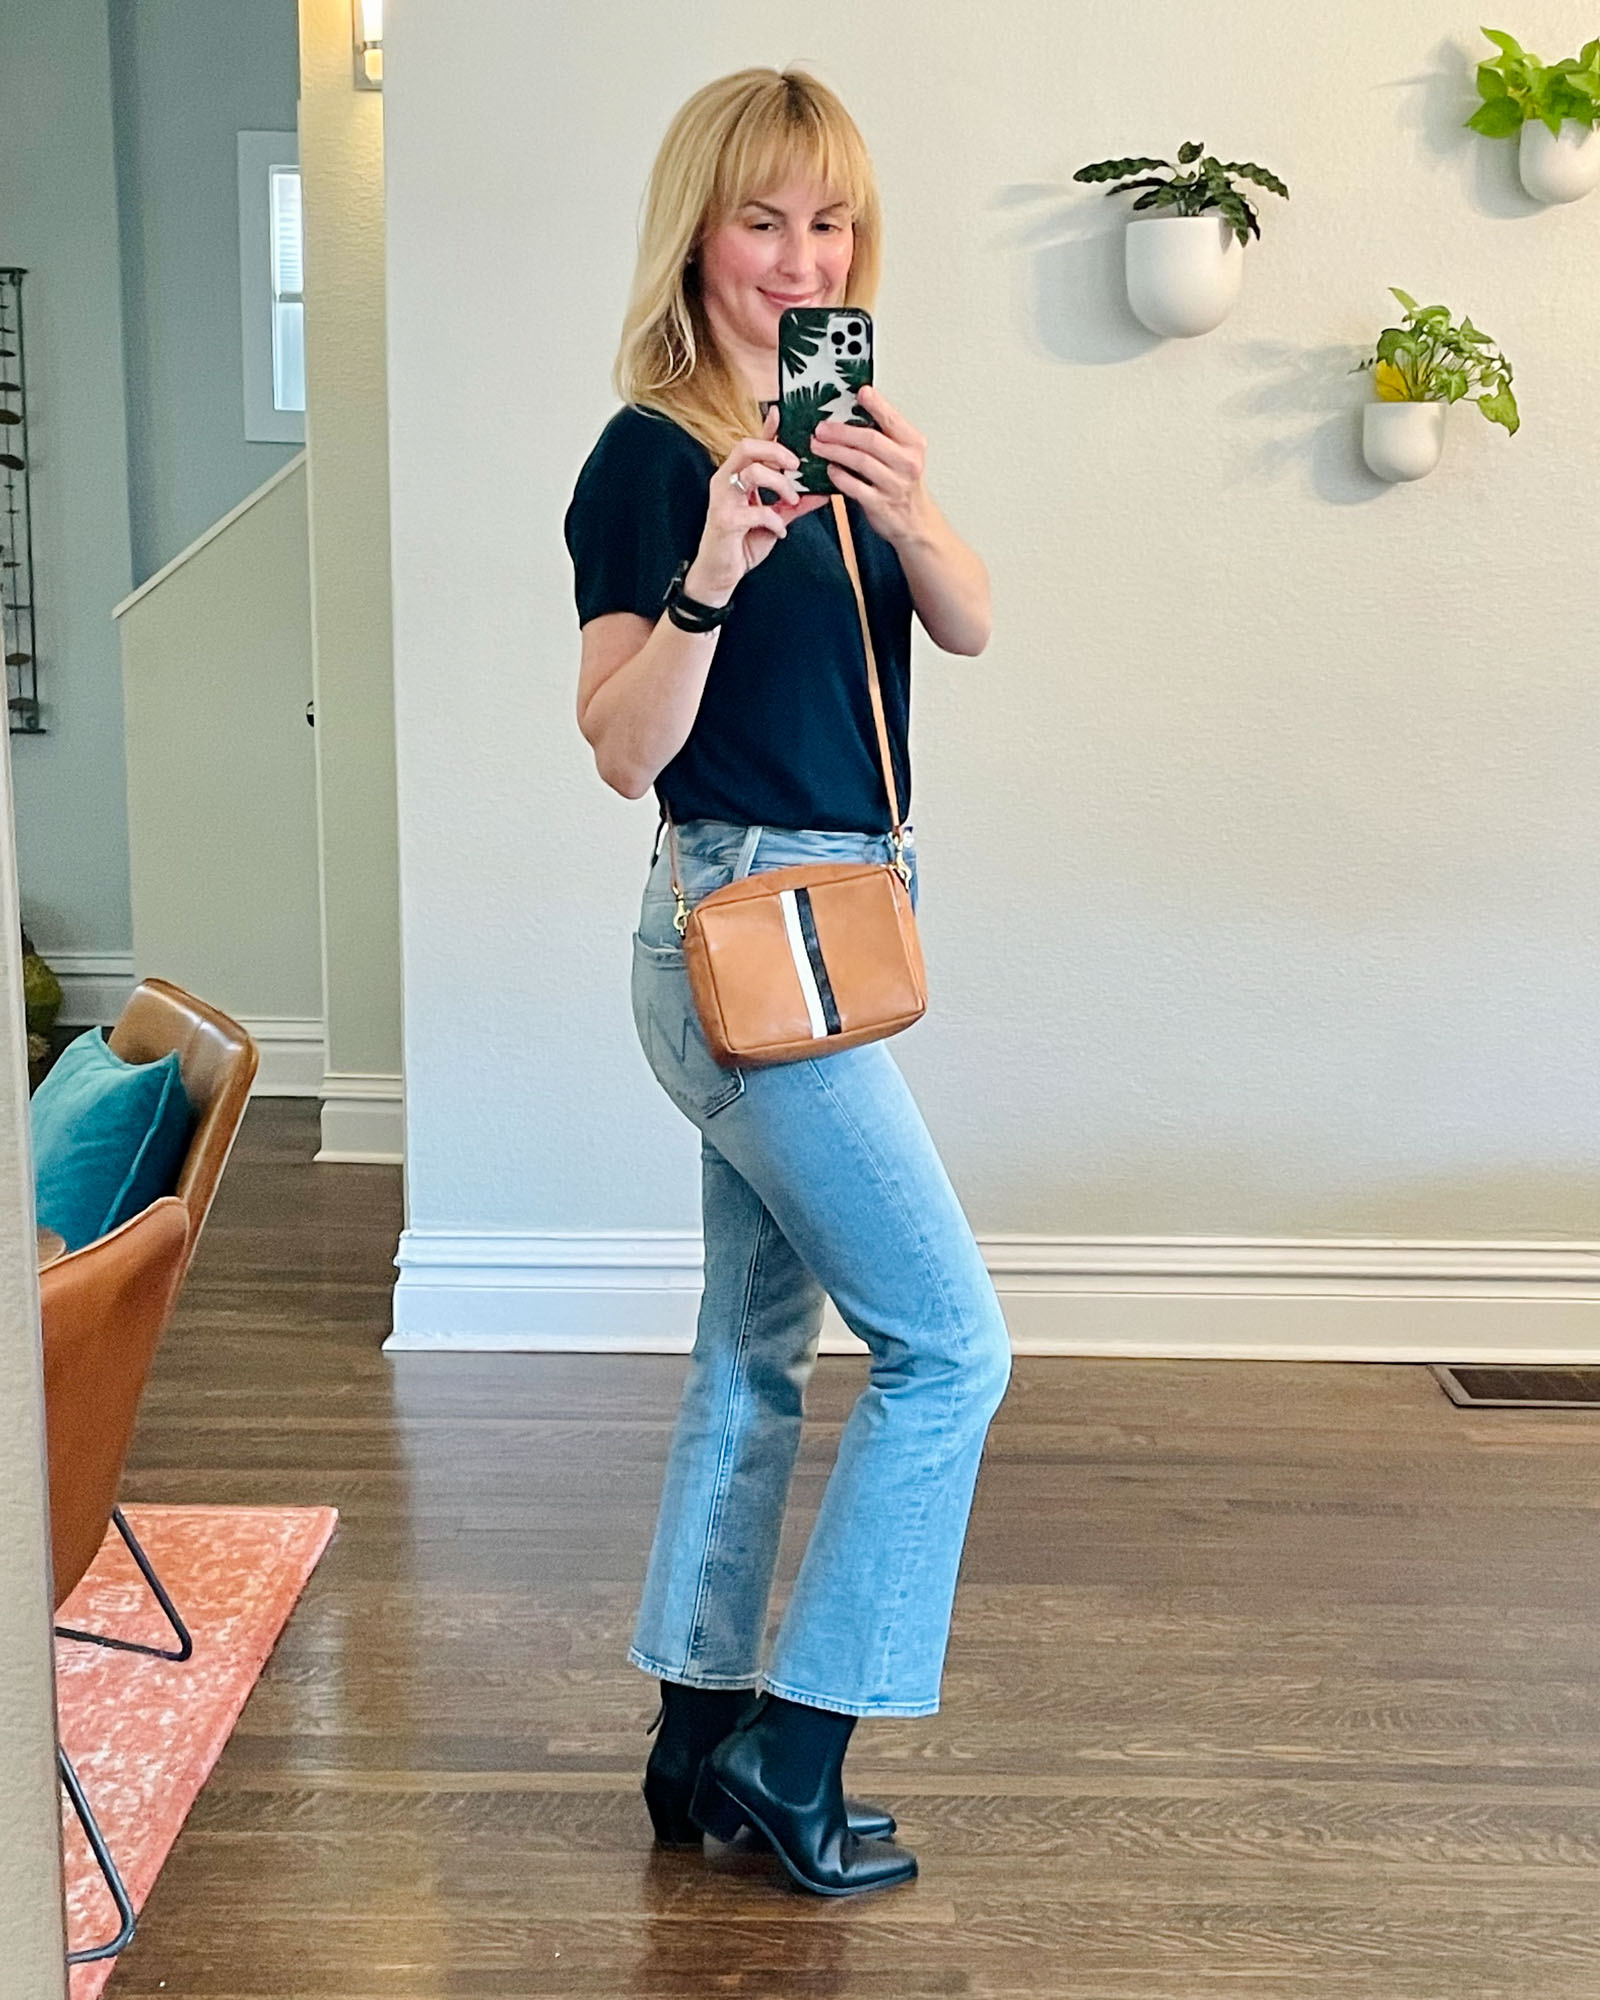 Wearing the black Frame booties from the Nordstrom Sale with Mother jeans.